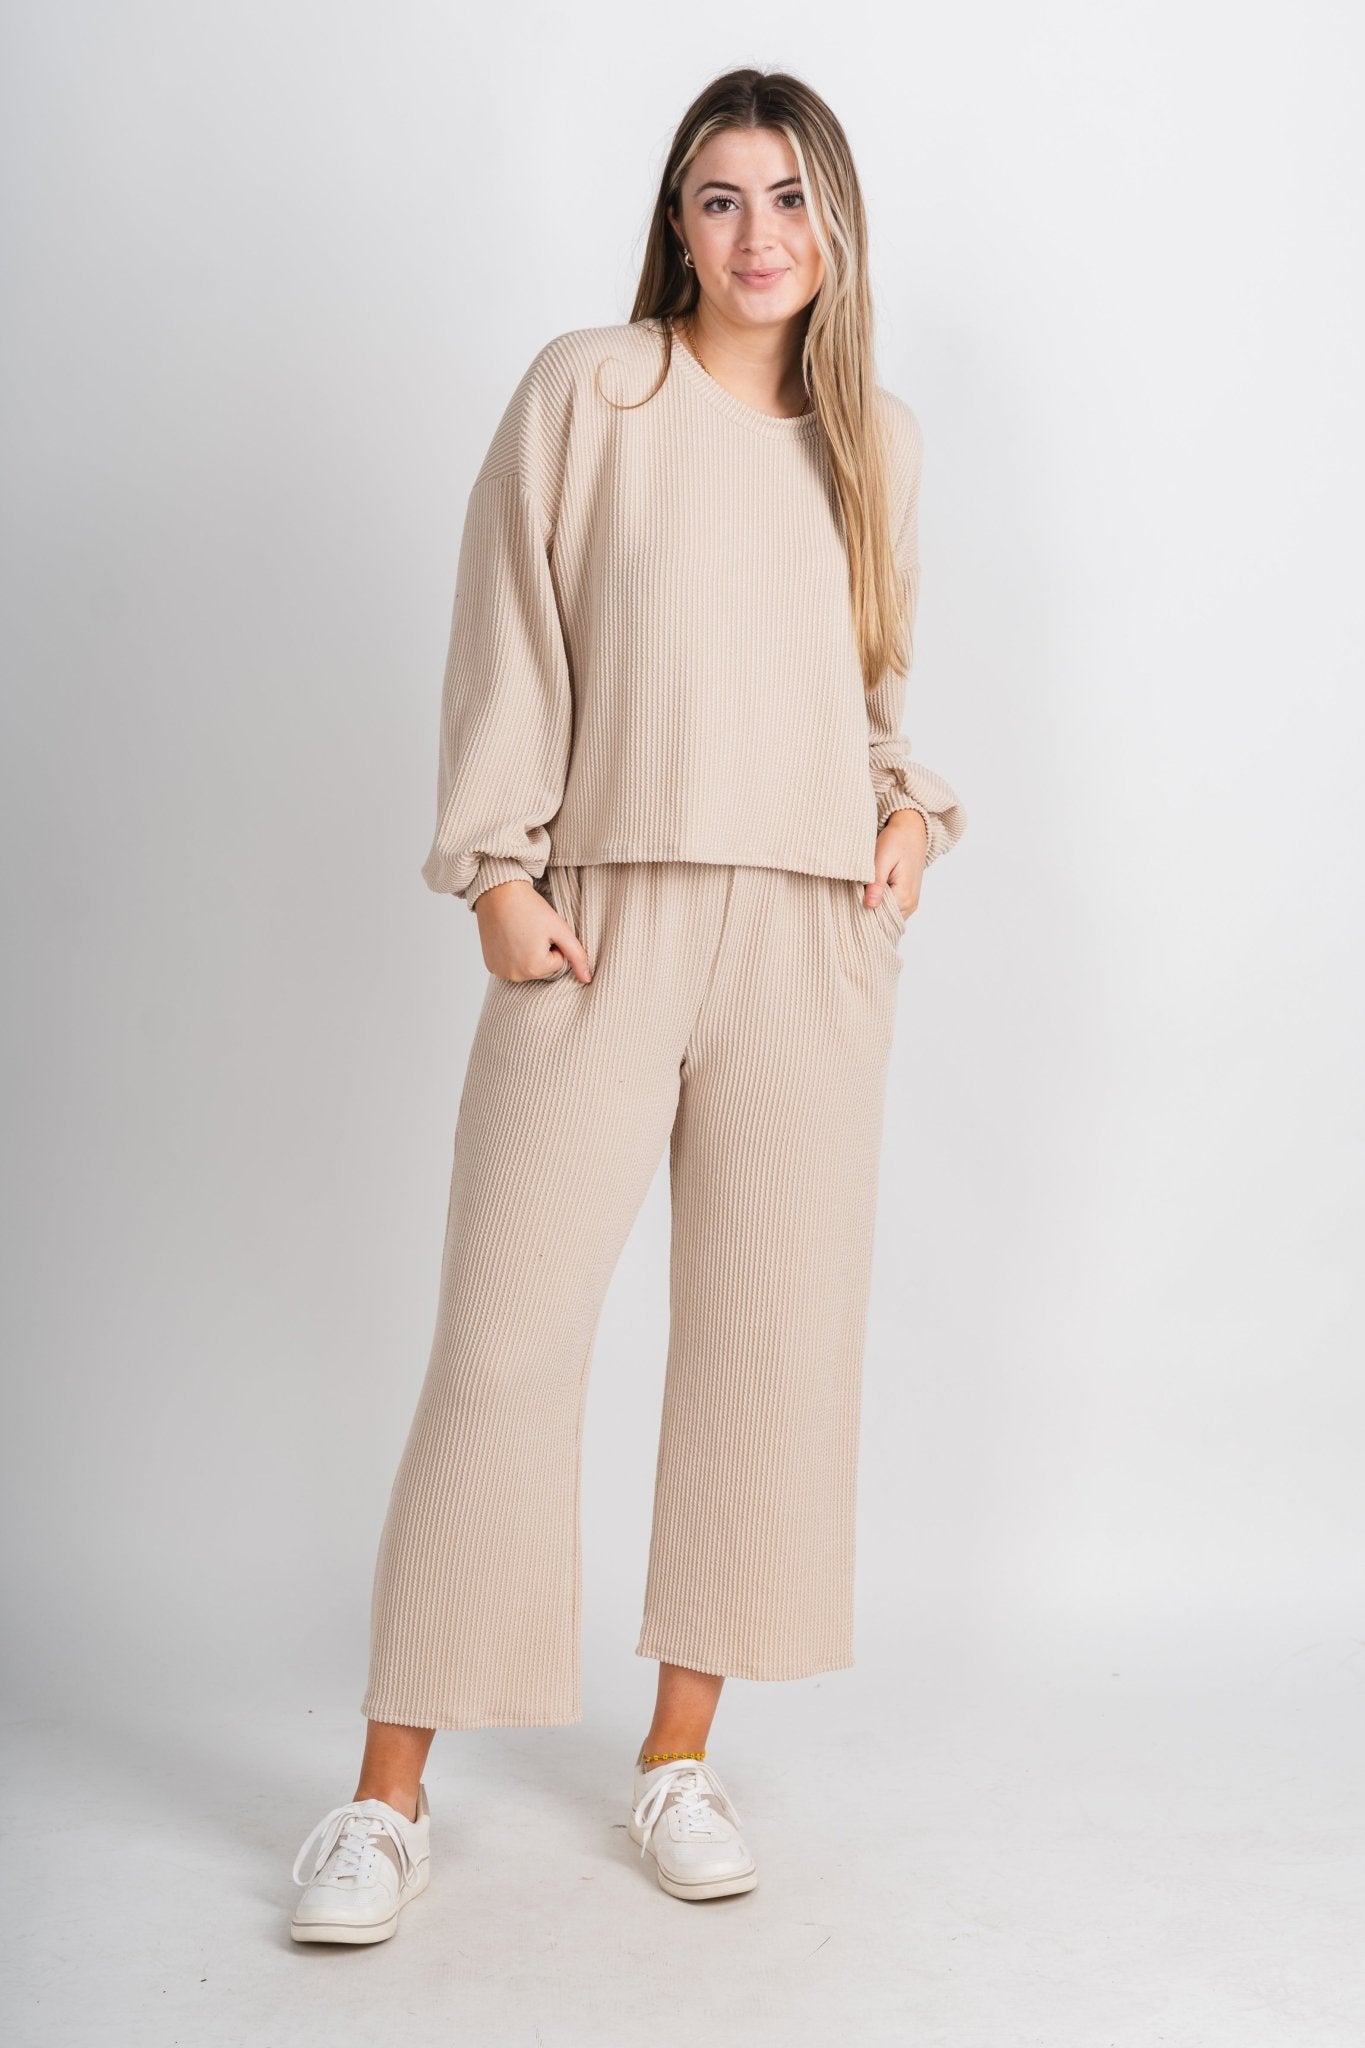 Manifest ribbed top taupe - Stylish Top - Trendy Lounge Sets at Lush Fashion Lounge Boutique in Oklahoma City